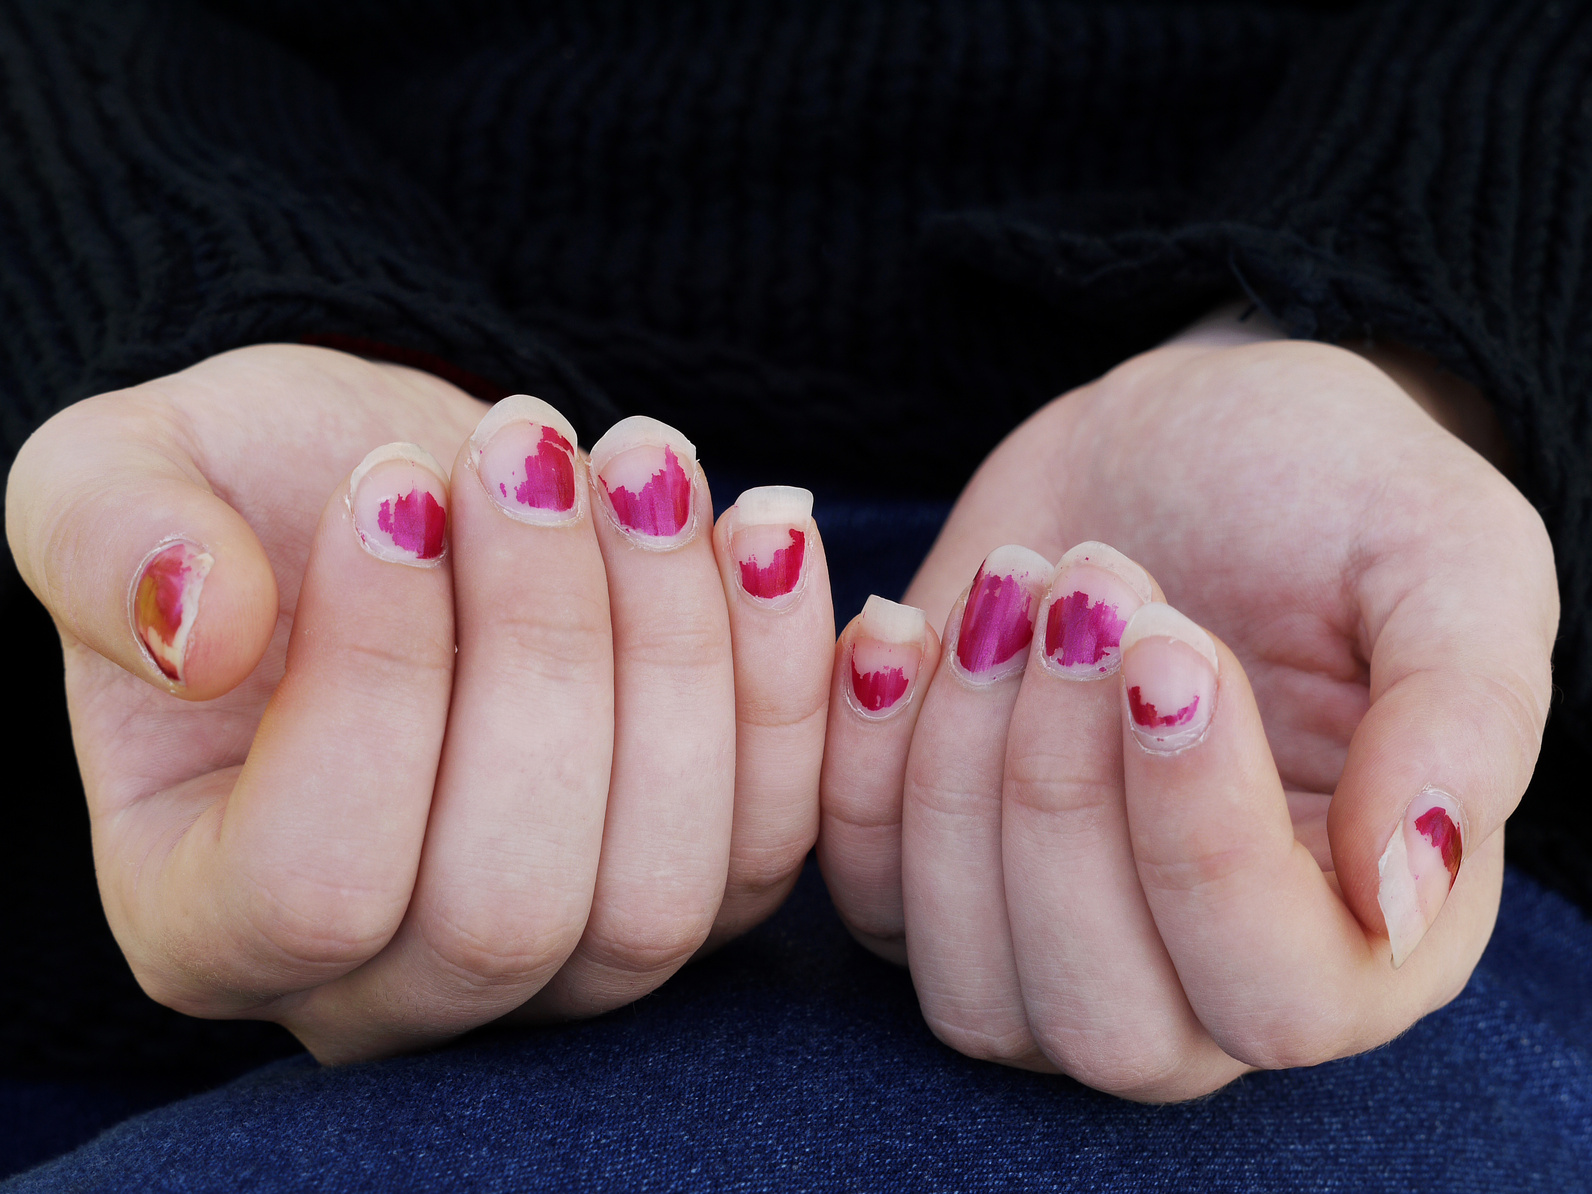 The sign of poor nail health, how to remedy it